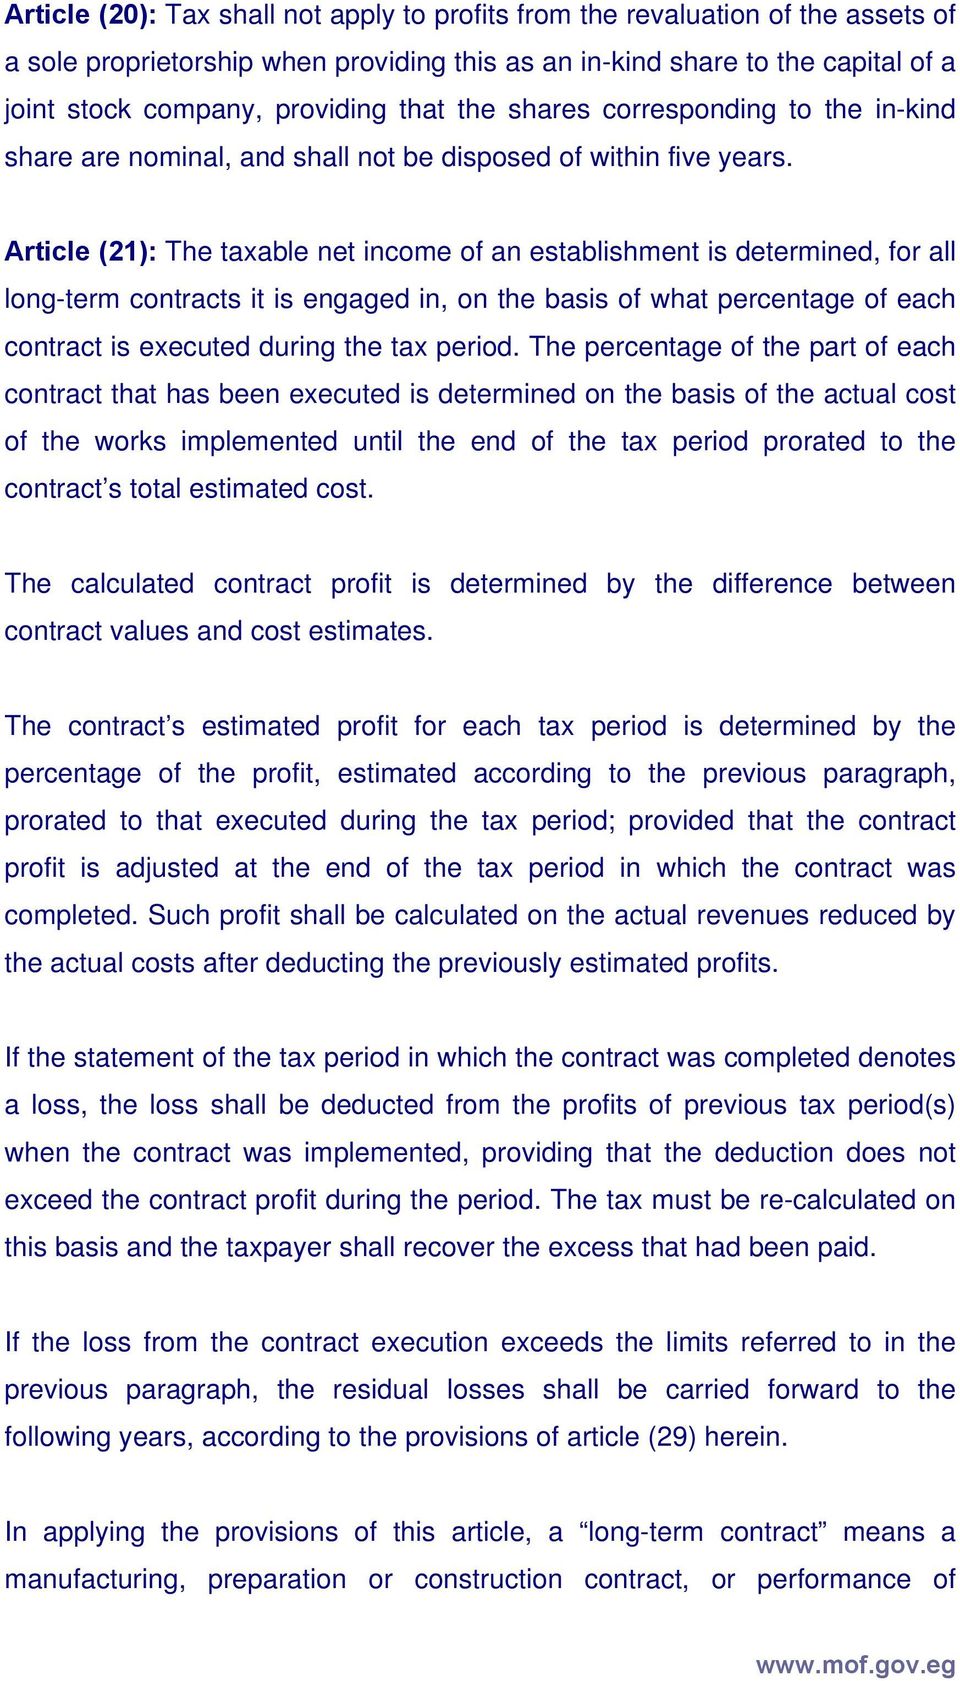 Article (21): The taxable net income of an establishment is determined, for all long-term contracts it is engaged in, on the basis of what percentage of each contract is executed during the tax